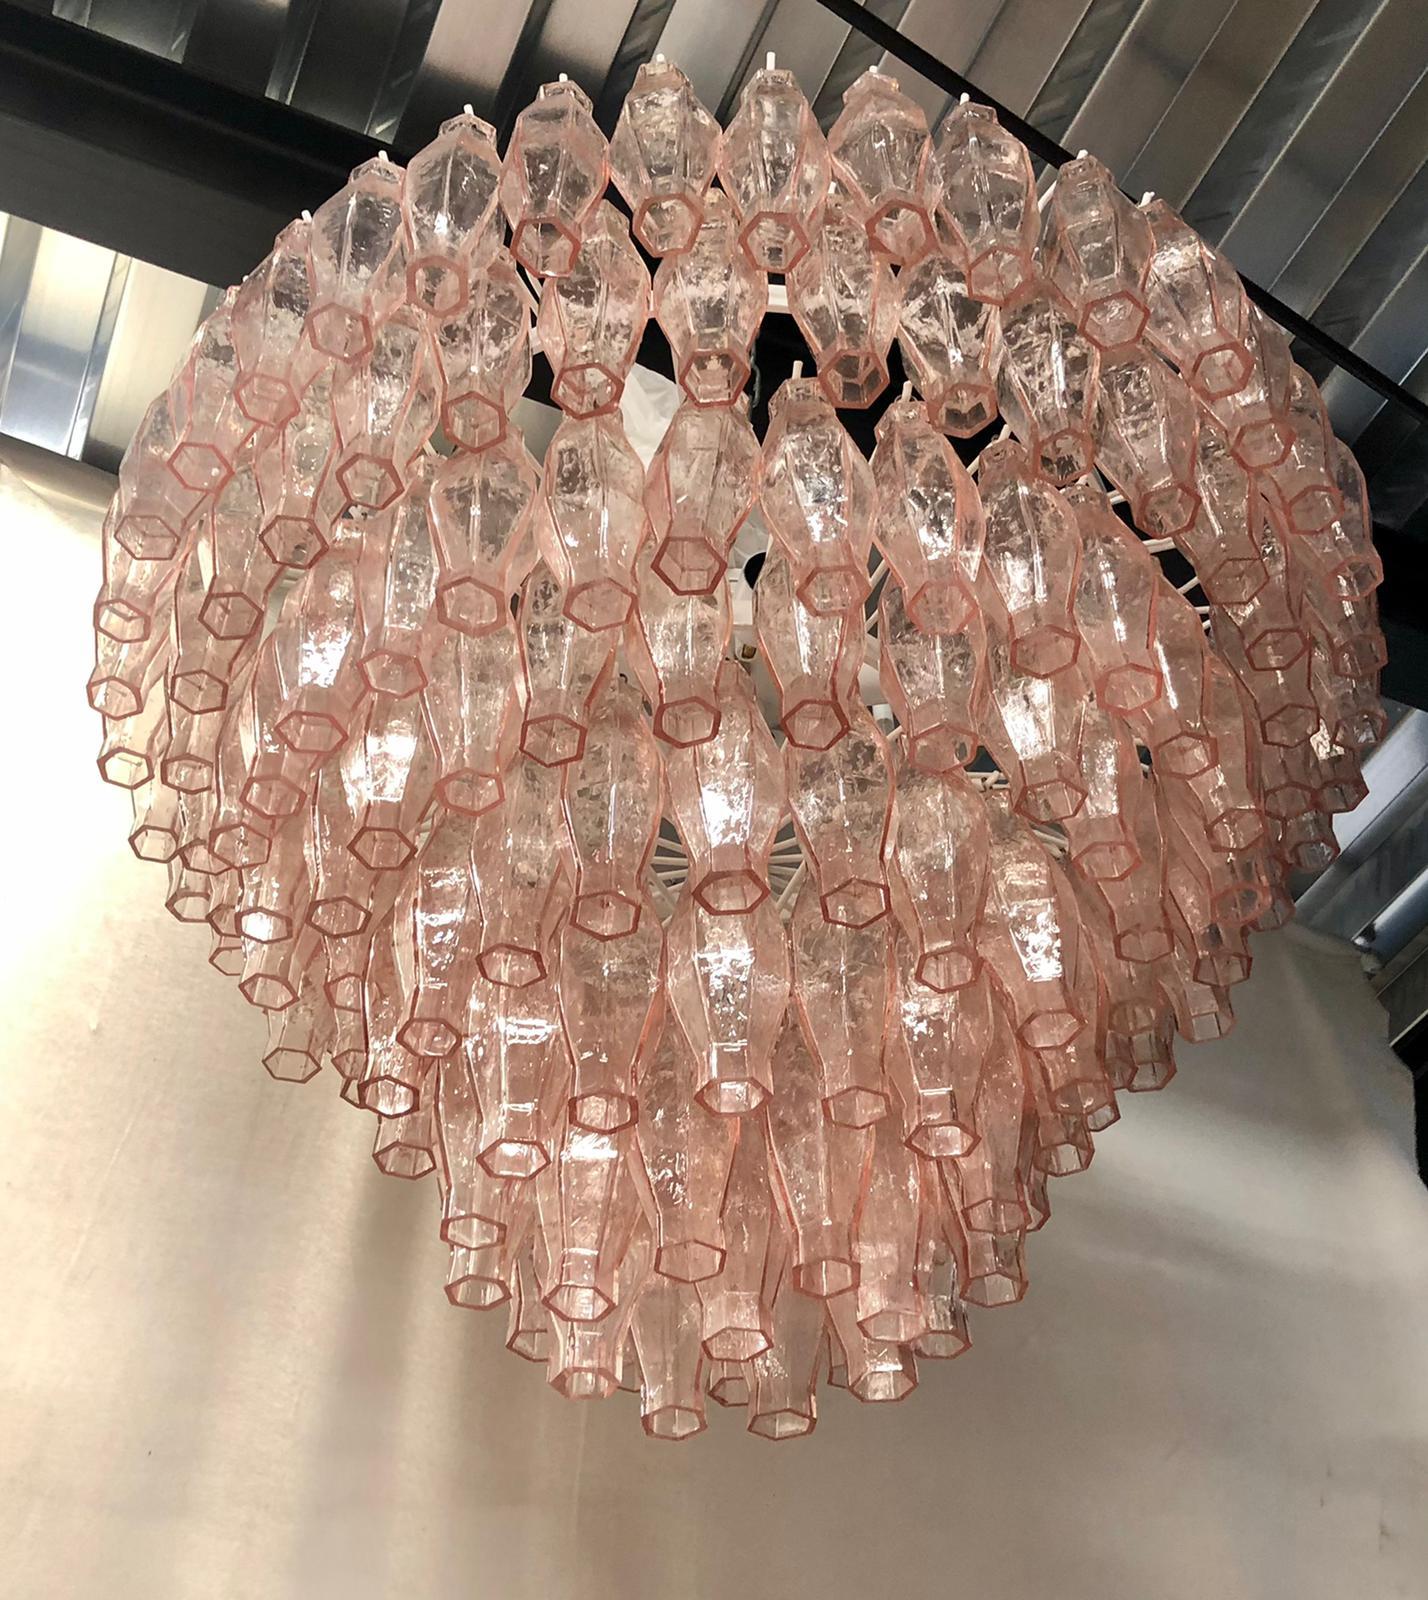 Splendid Murano glass chandelier with a particular transparent pink color. Its design is also very particular round but pyramidal in height. The Murano furnaces create an indisputable timeless design, simple but elegant at the same time.

The